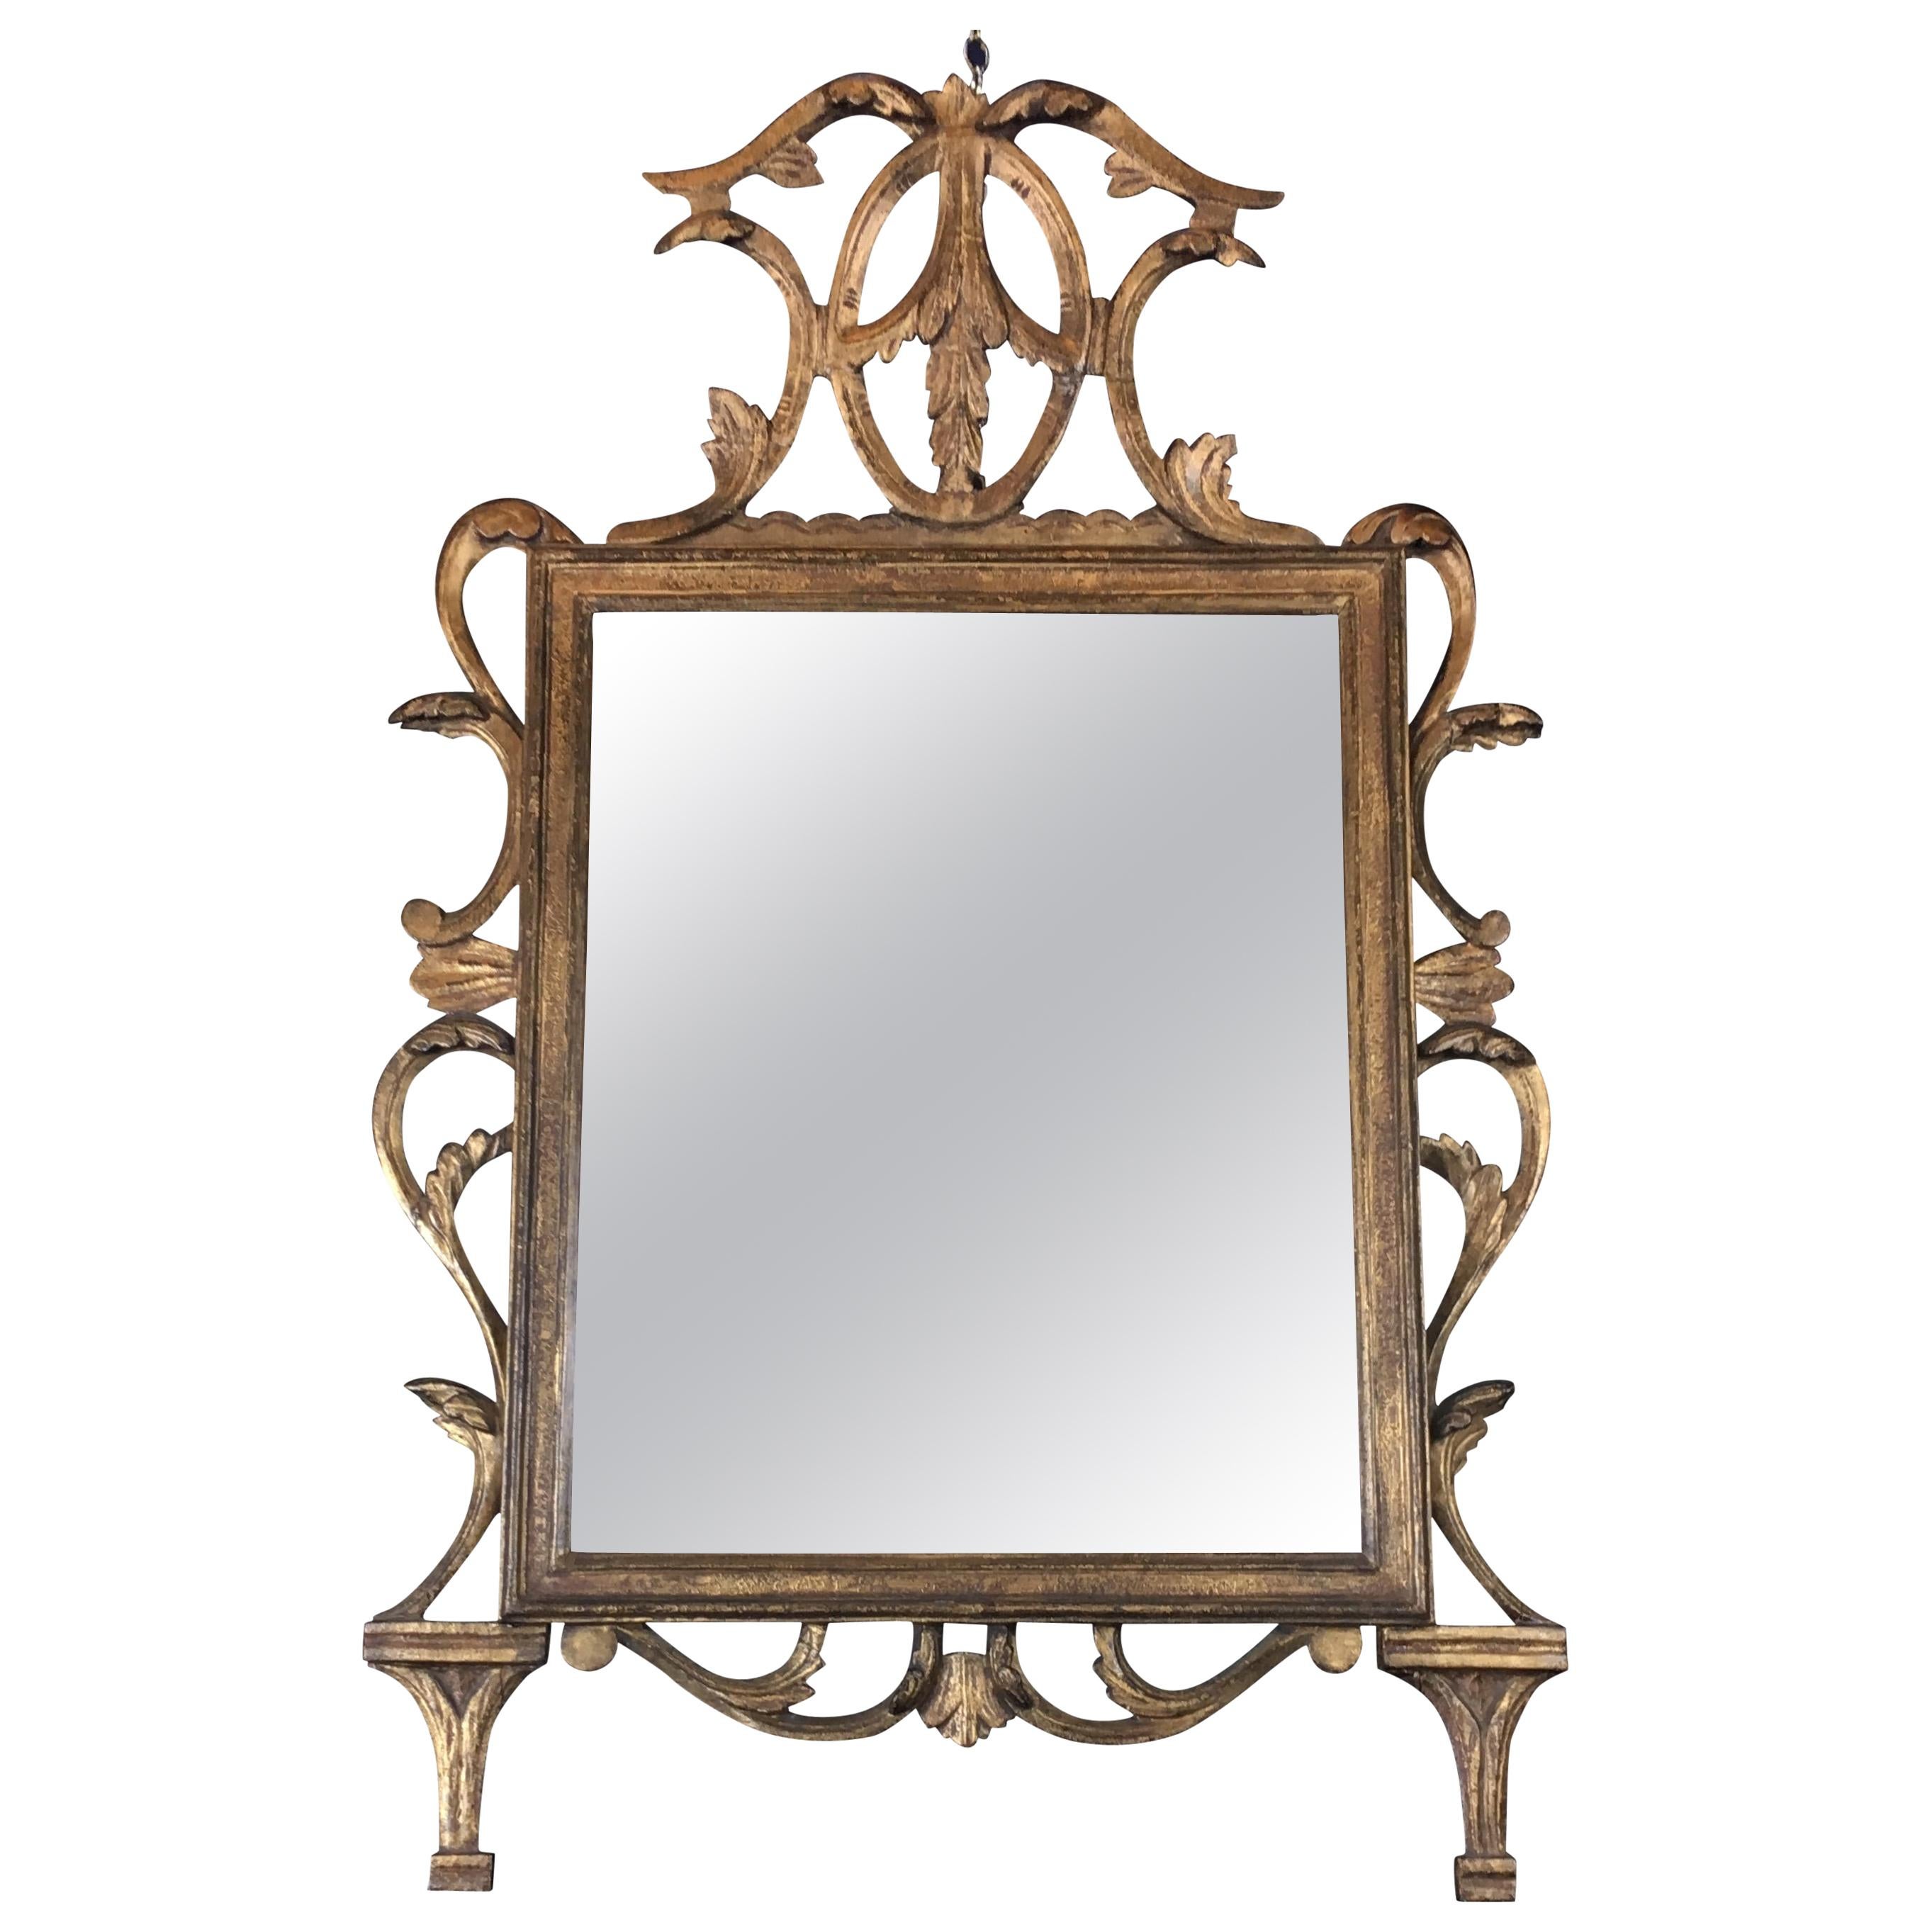 18th Century Regency Hand-Carved and Gilded Mirror, English